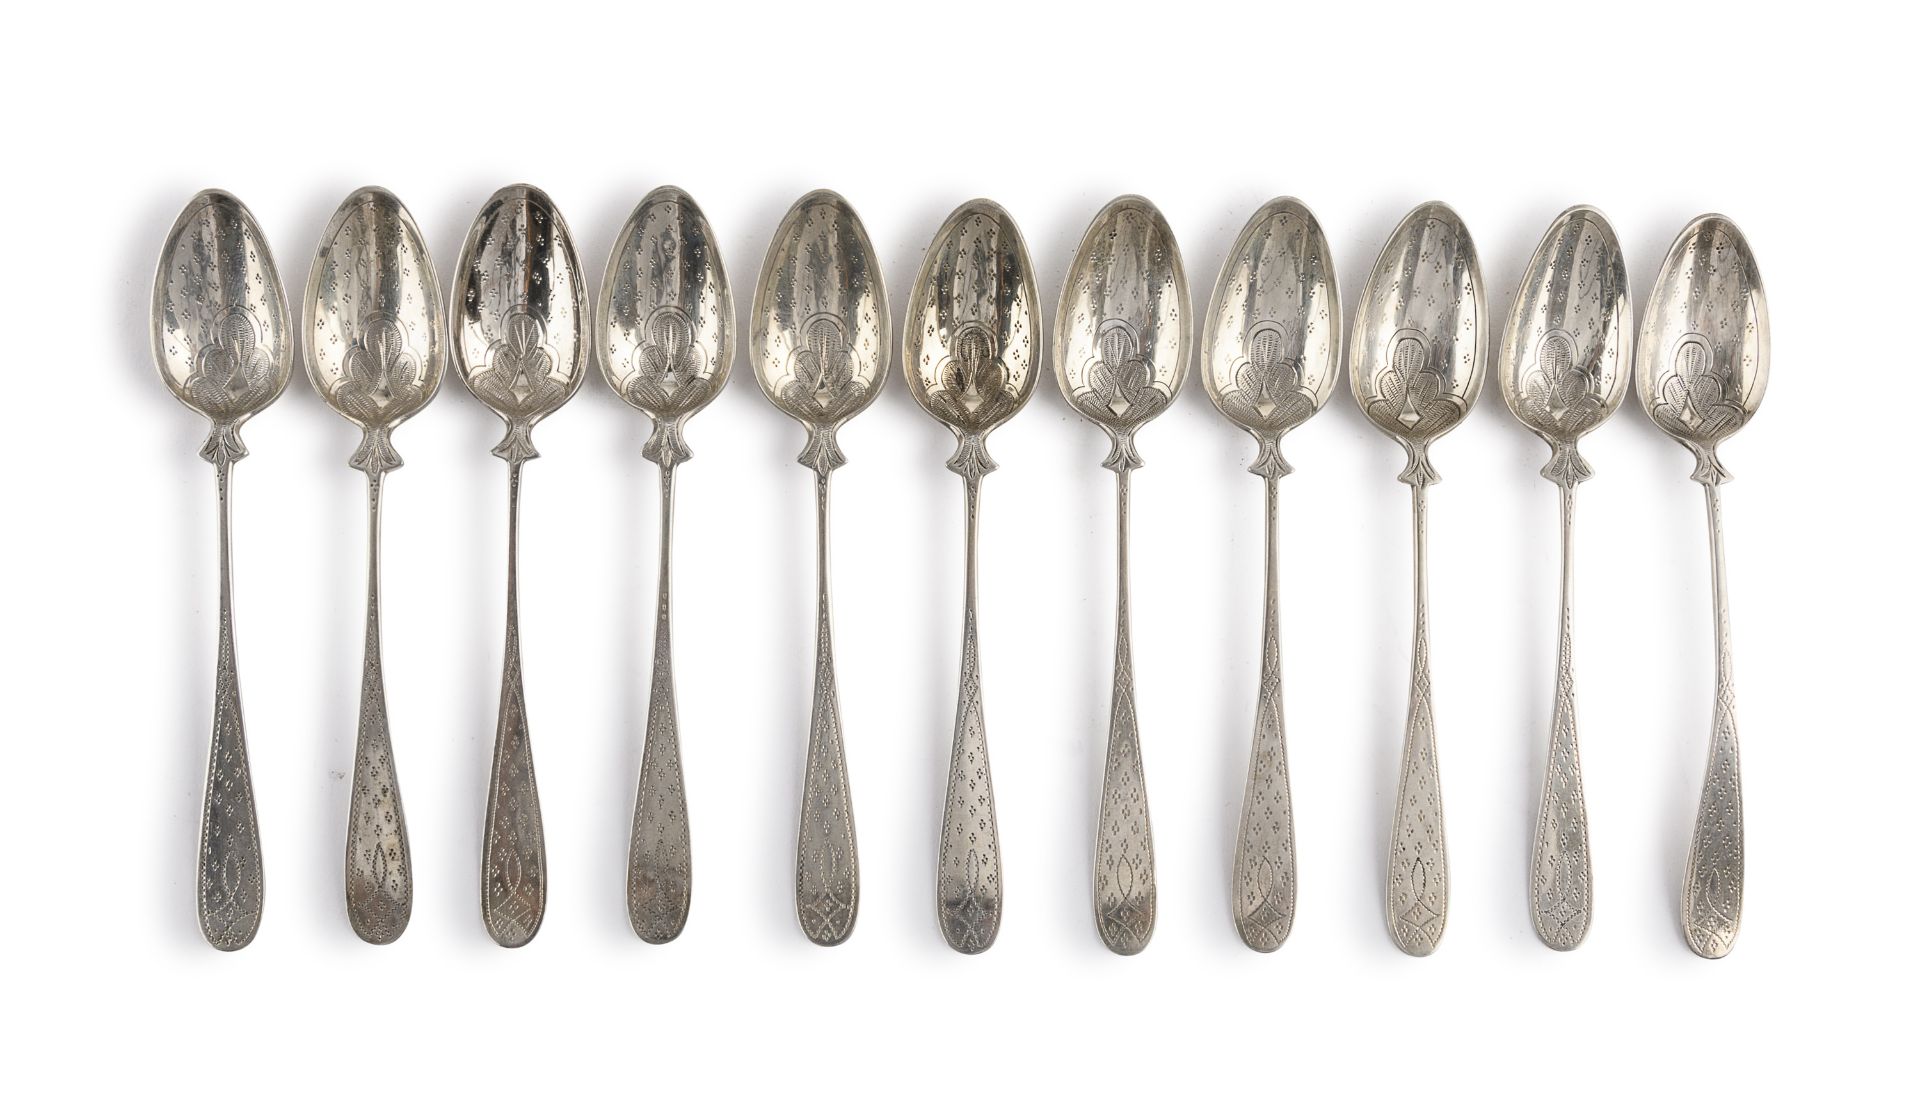 ELEVEN SILVER SPOONS END OF THE 19TH CENTURY